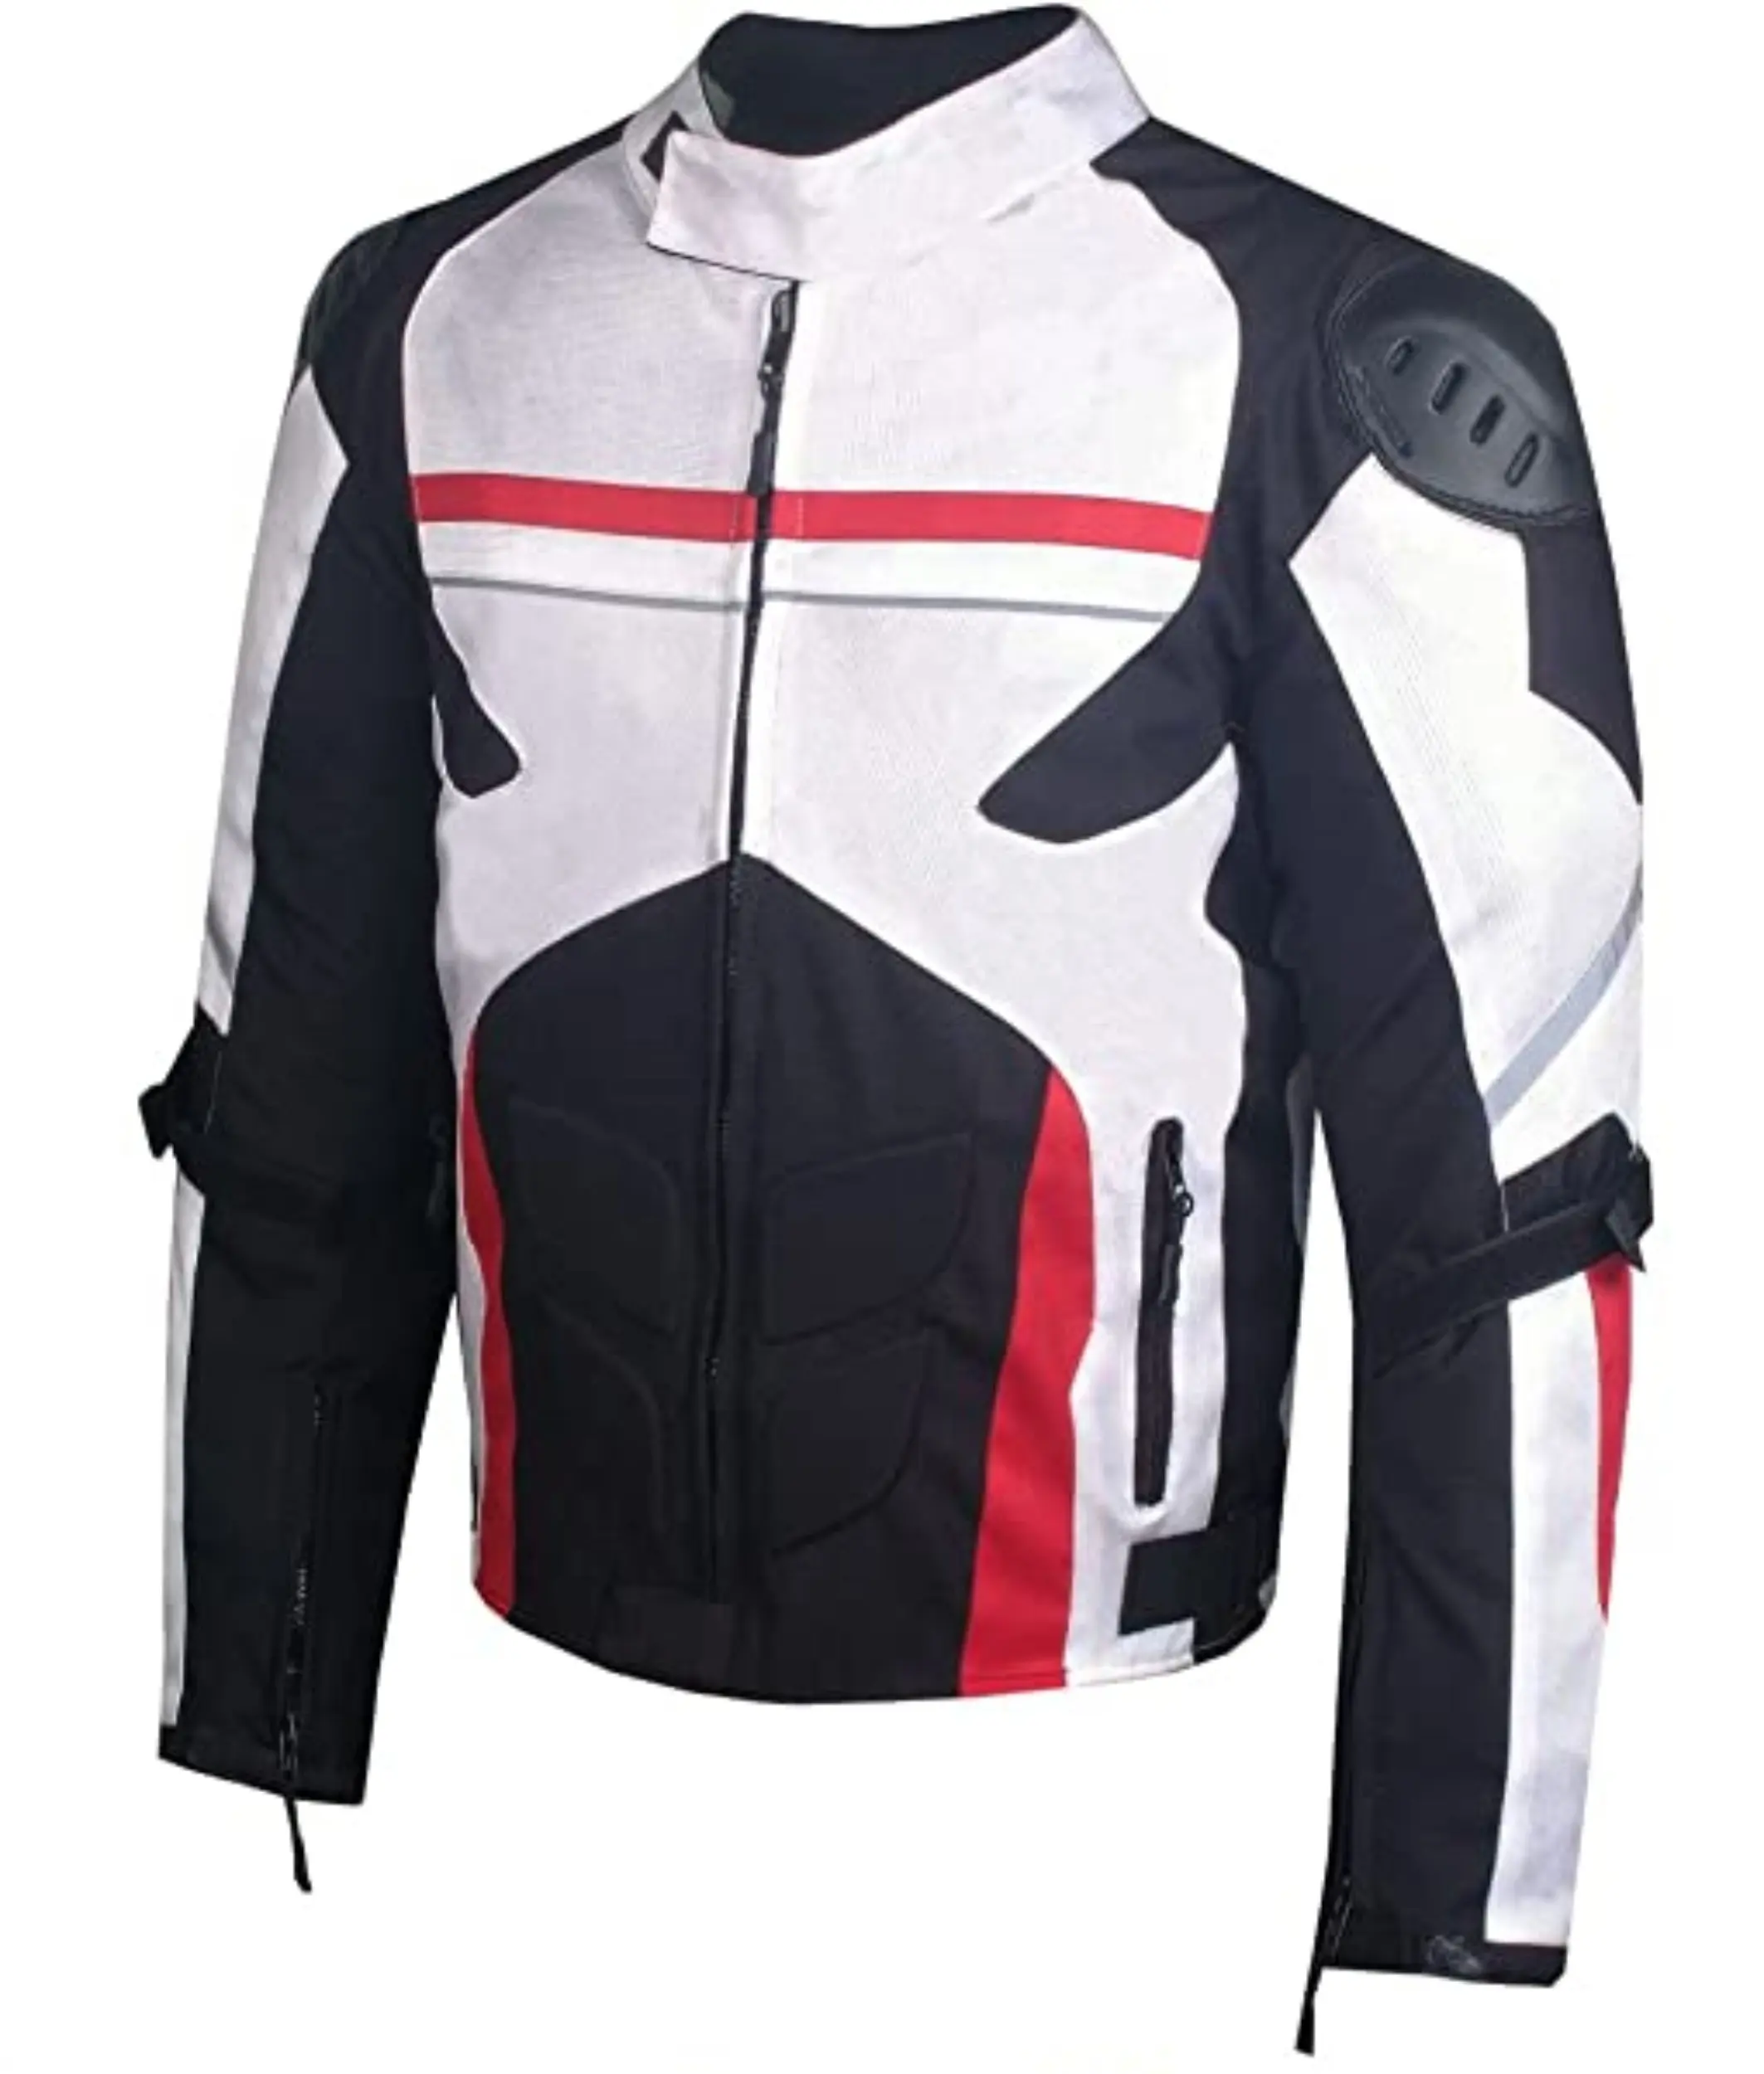 Customizable Super Speed Sports Men's Motorcycle Jacket with Armor Padding in arms back and shoulders